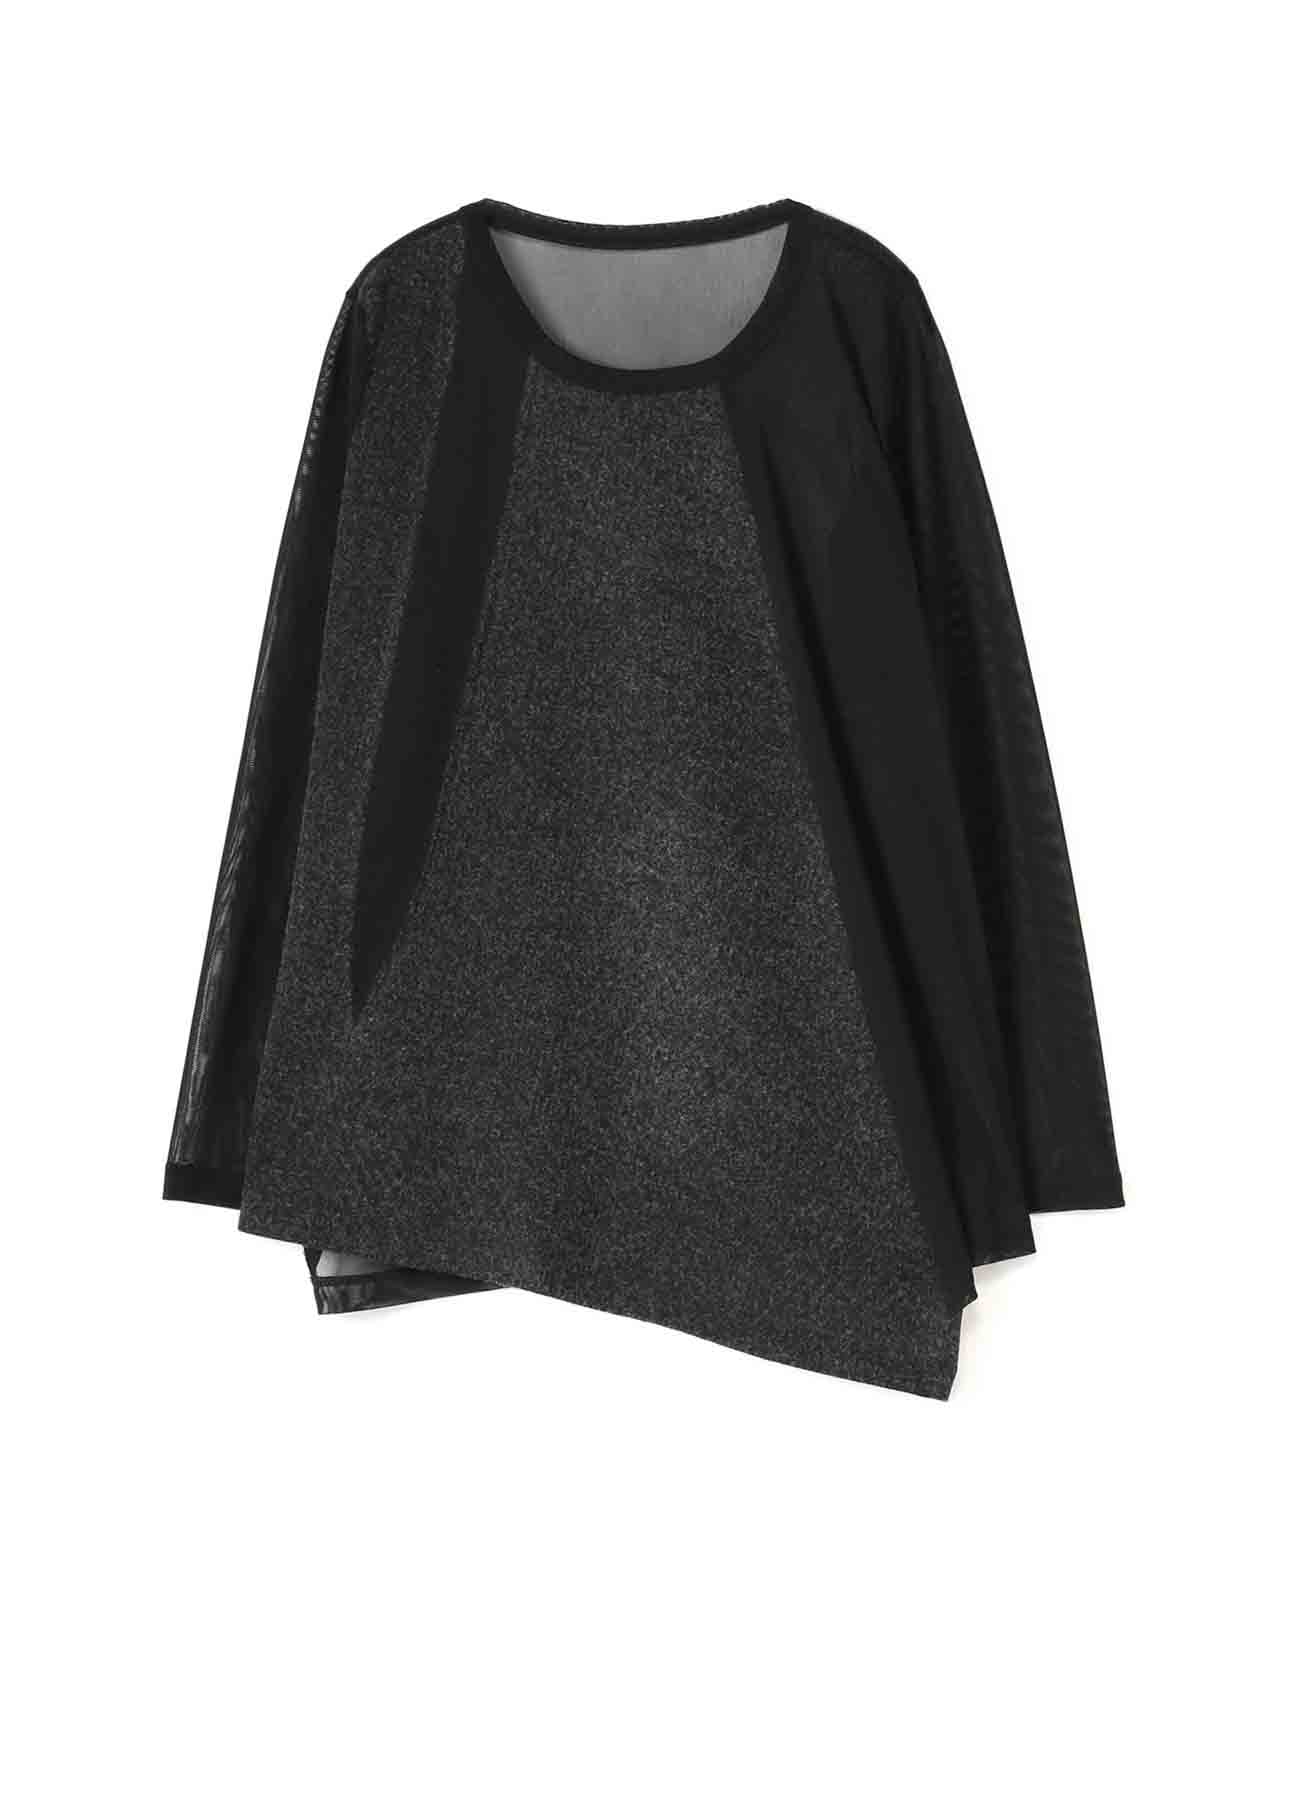 POLYESTER TULLE x WOOL NEEDLE PUNCH HEM FLARE LONG SLEEVE T-SHIRT